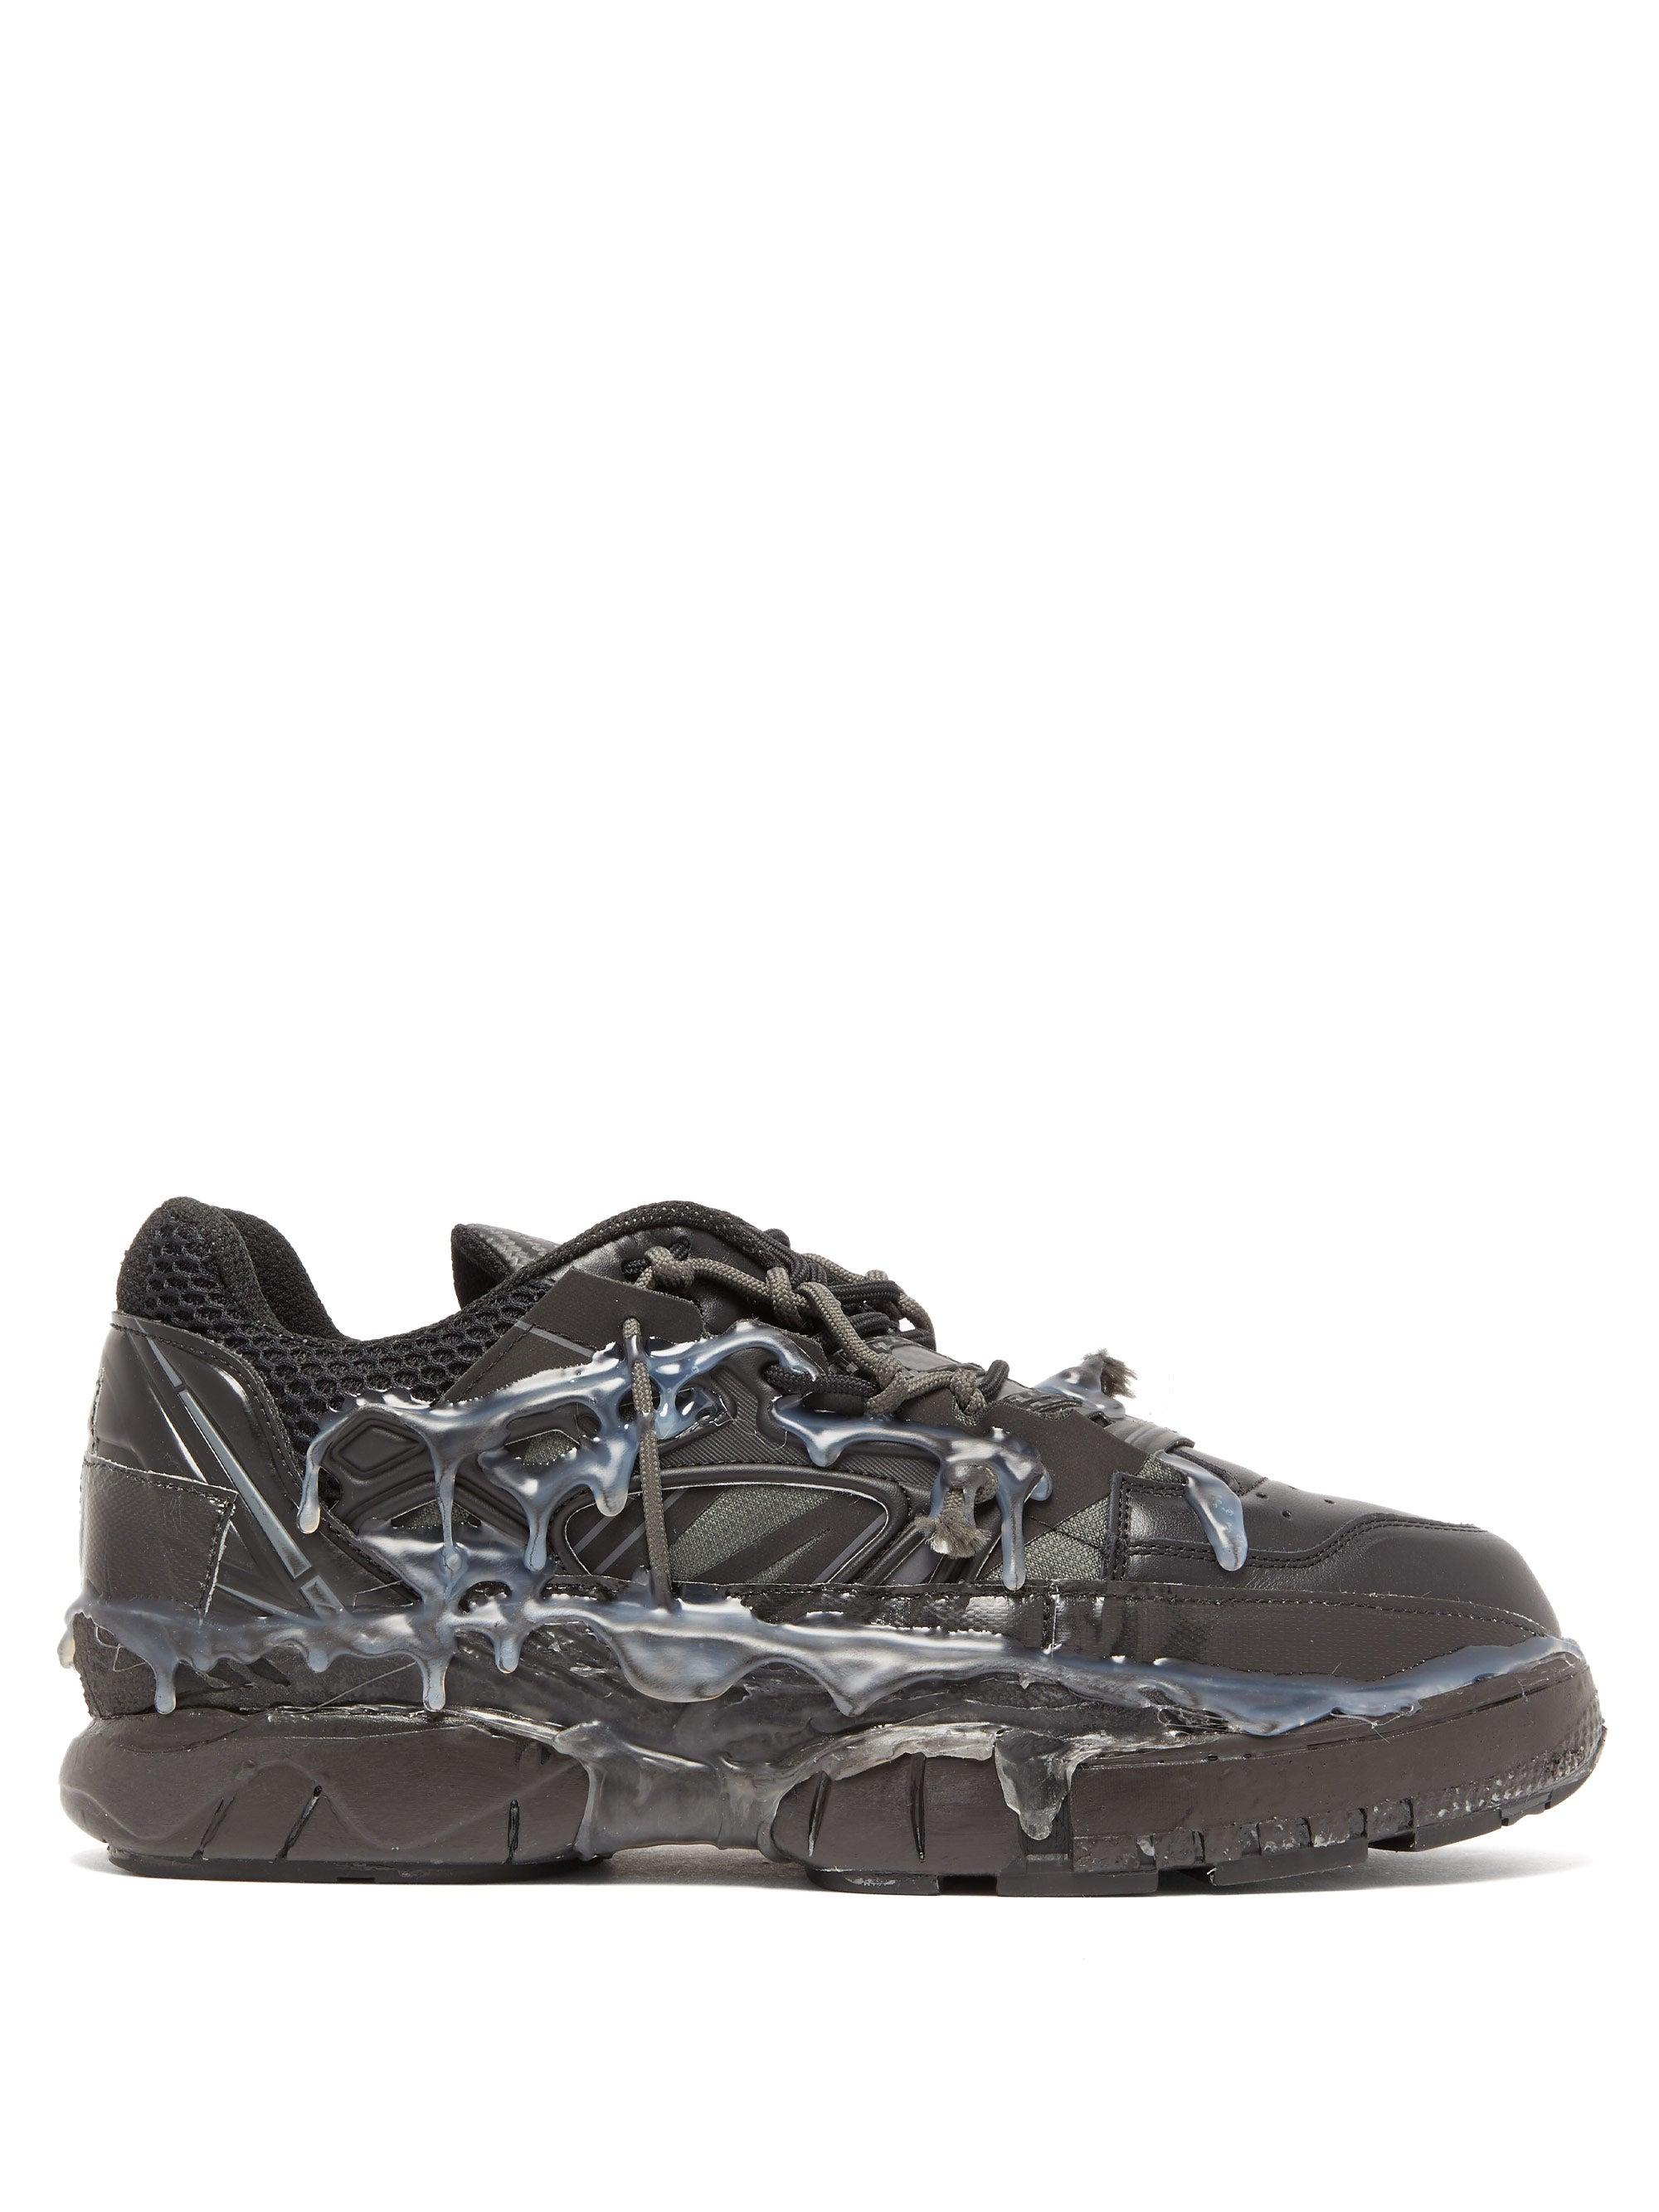 Maison Margiela Fusion Leather And Mesh Trainers In Black, 55% OFF